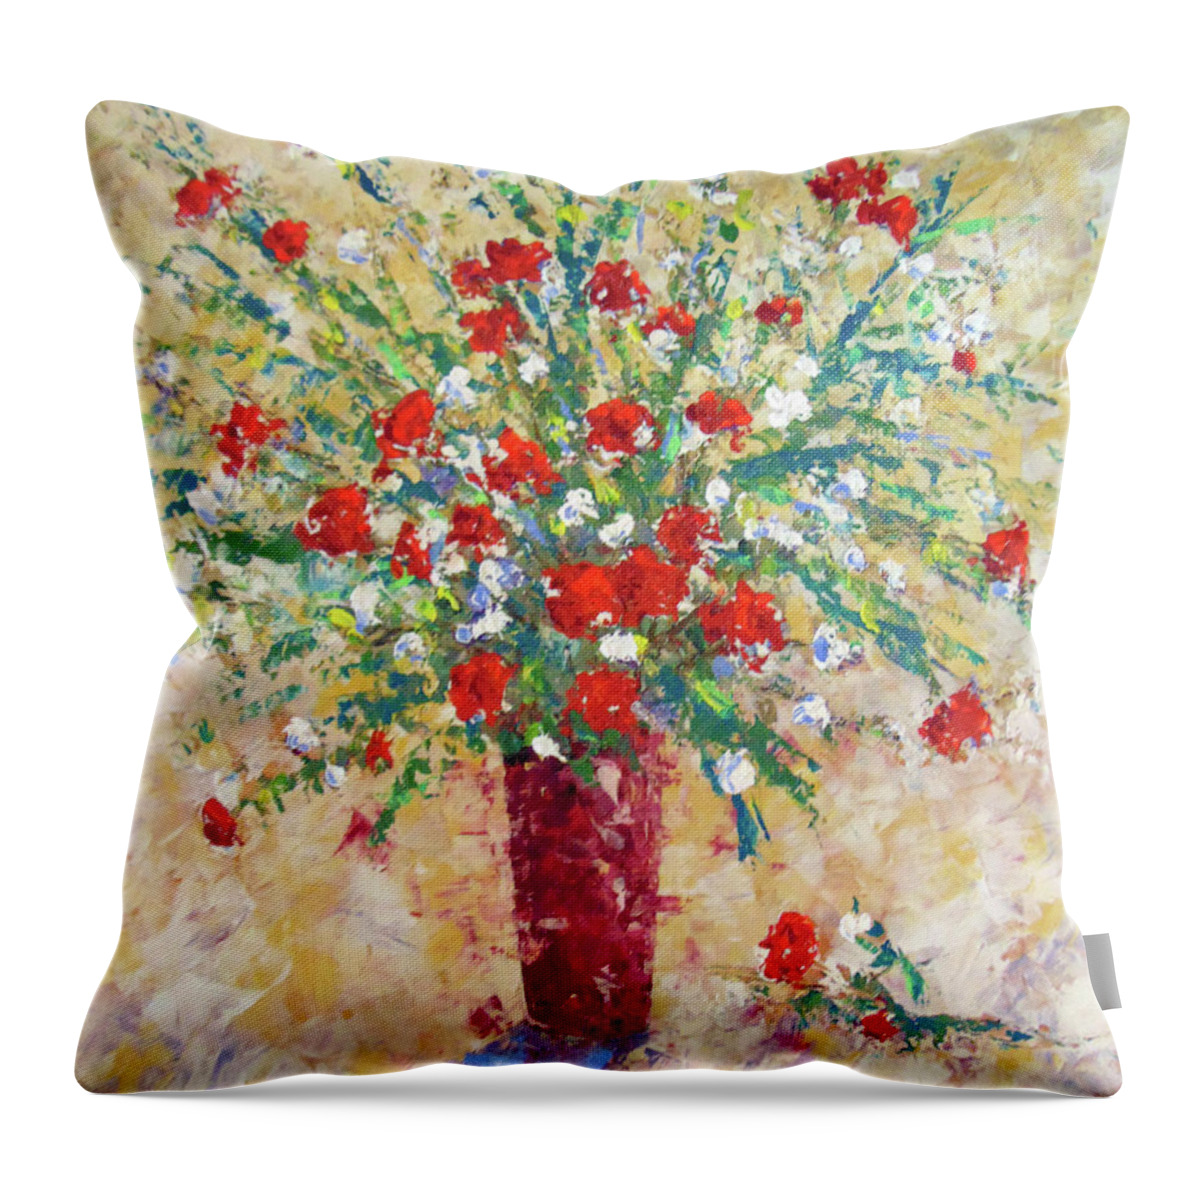 Floral Throw Pillow featuring the painting Red and white Roses by Frederic Payet